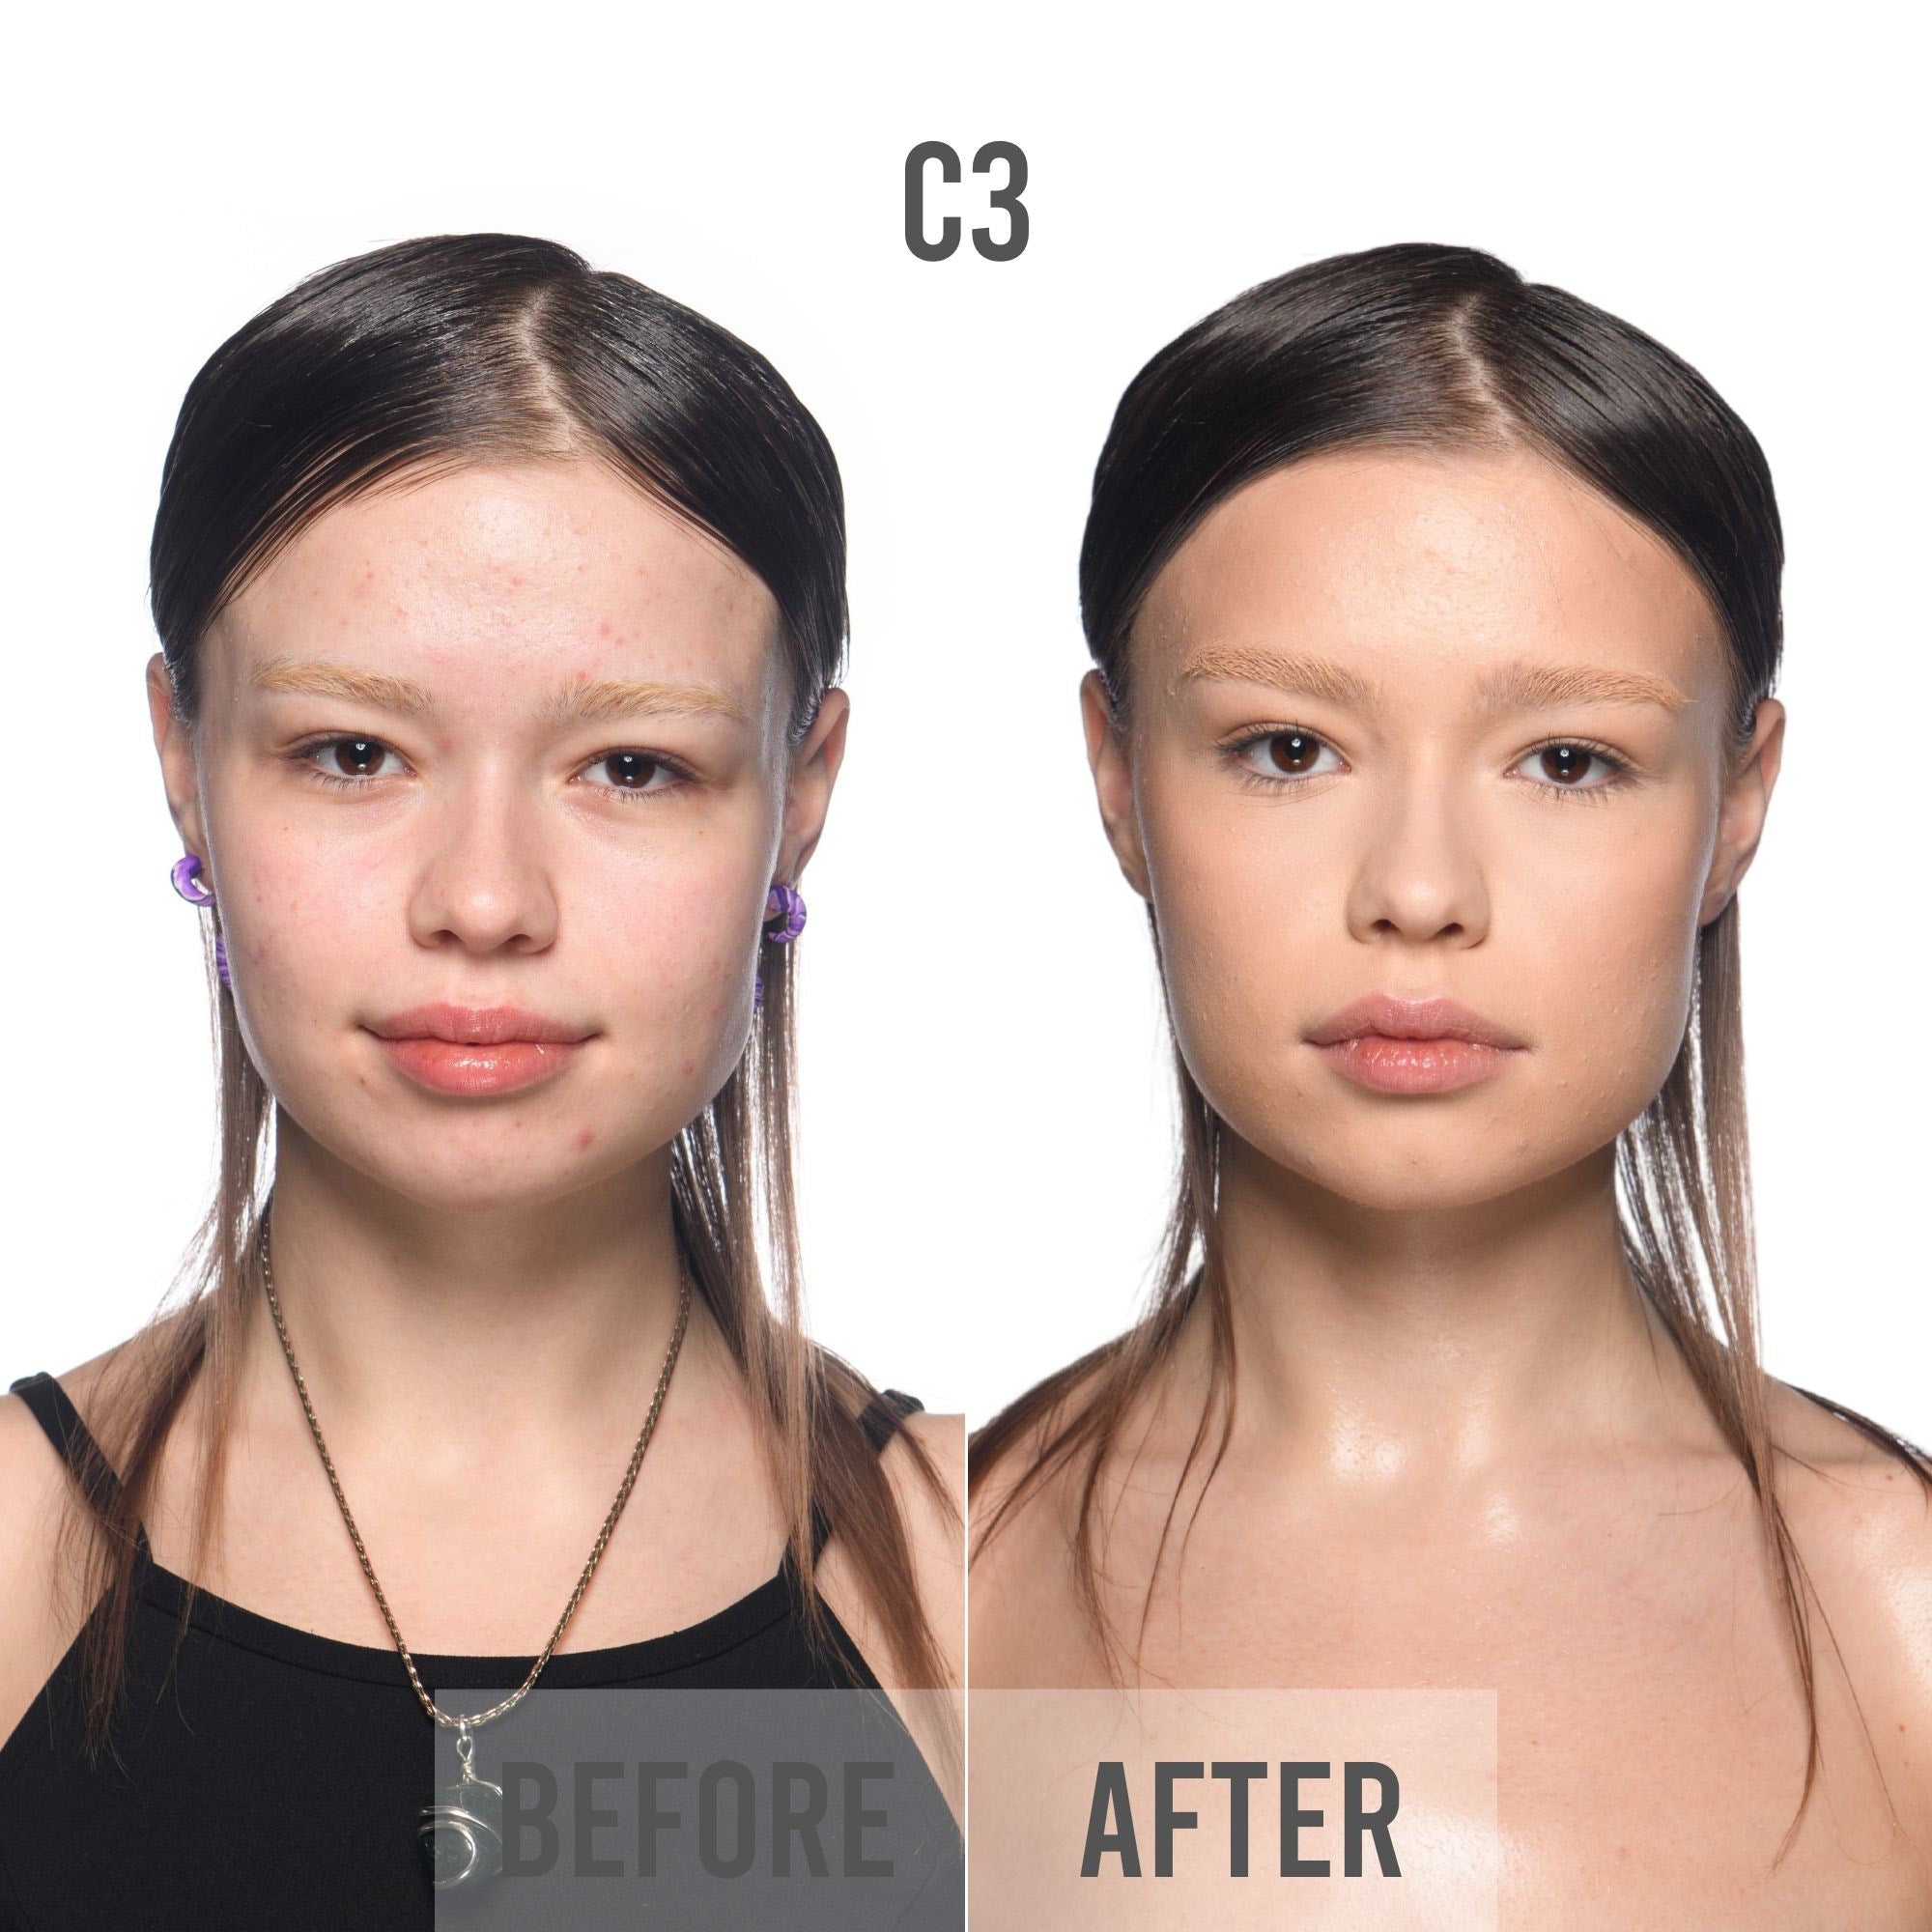 bPerfect CHROMA Cover Matte Foundation, C3 before &amp; after 